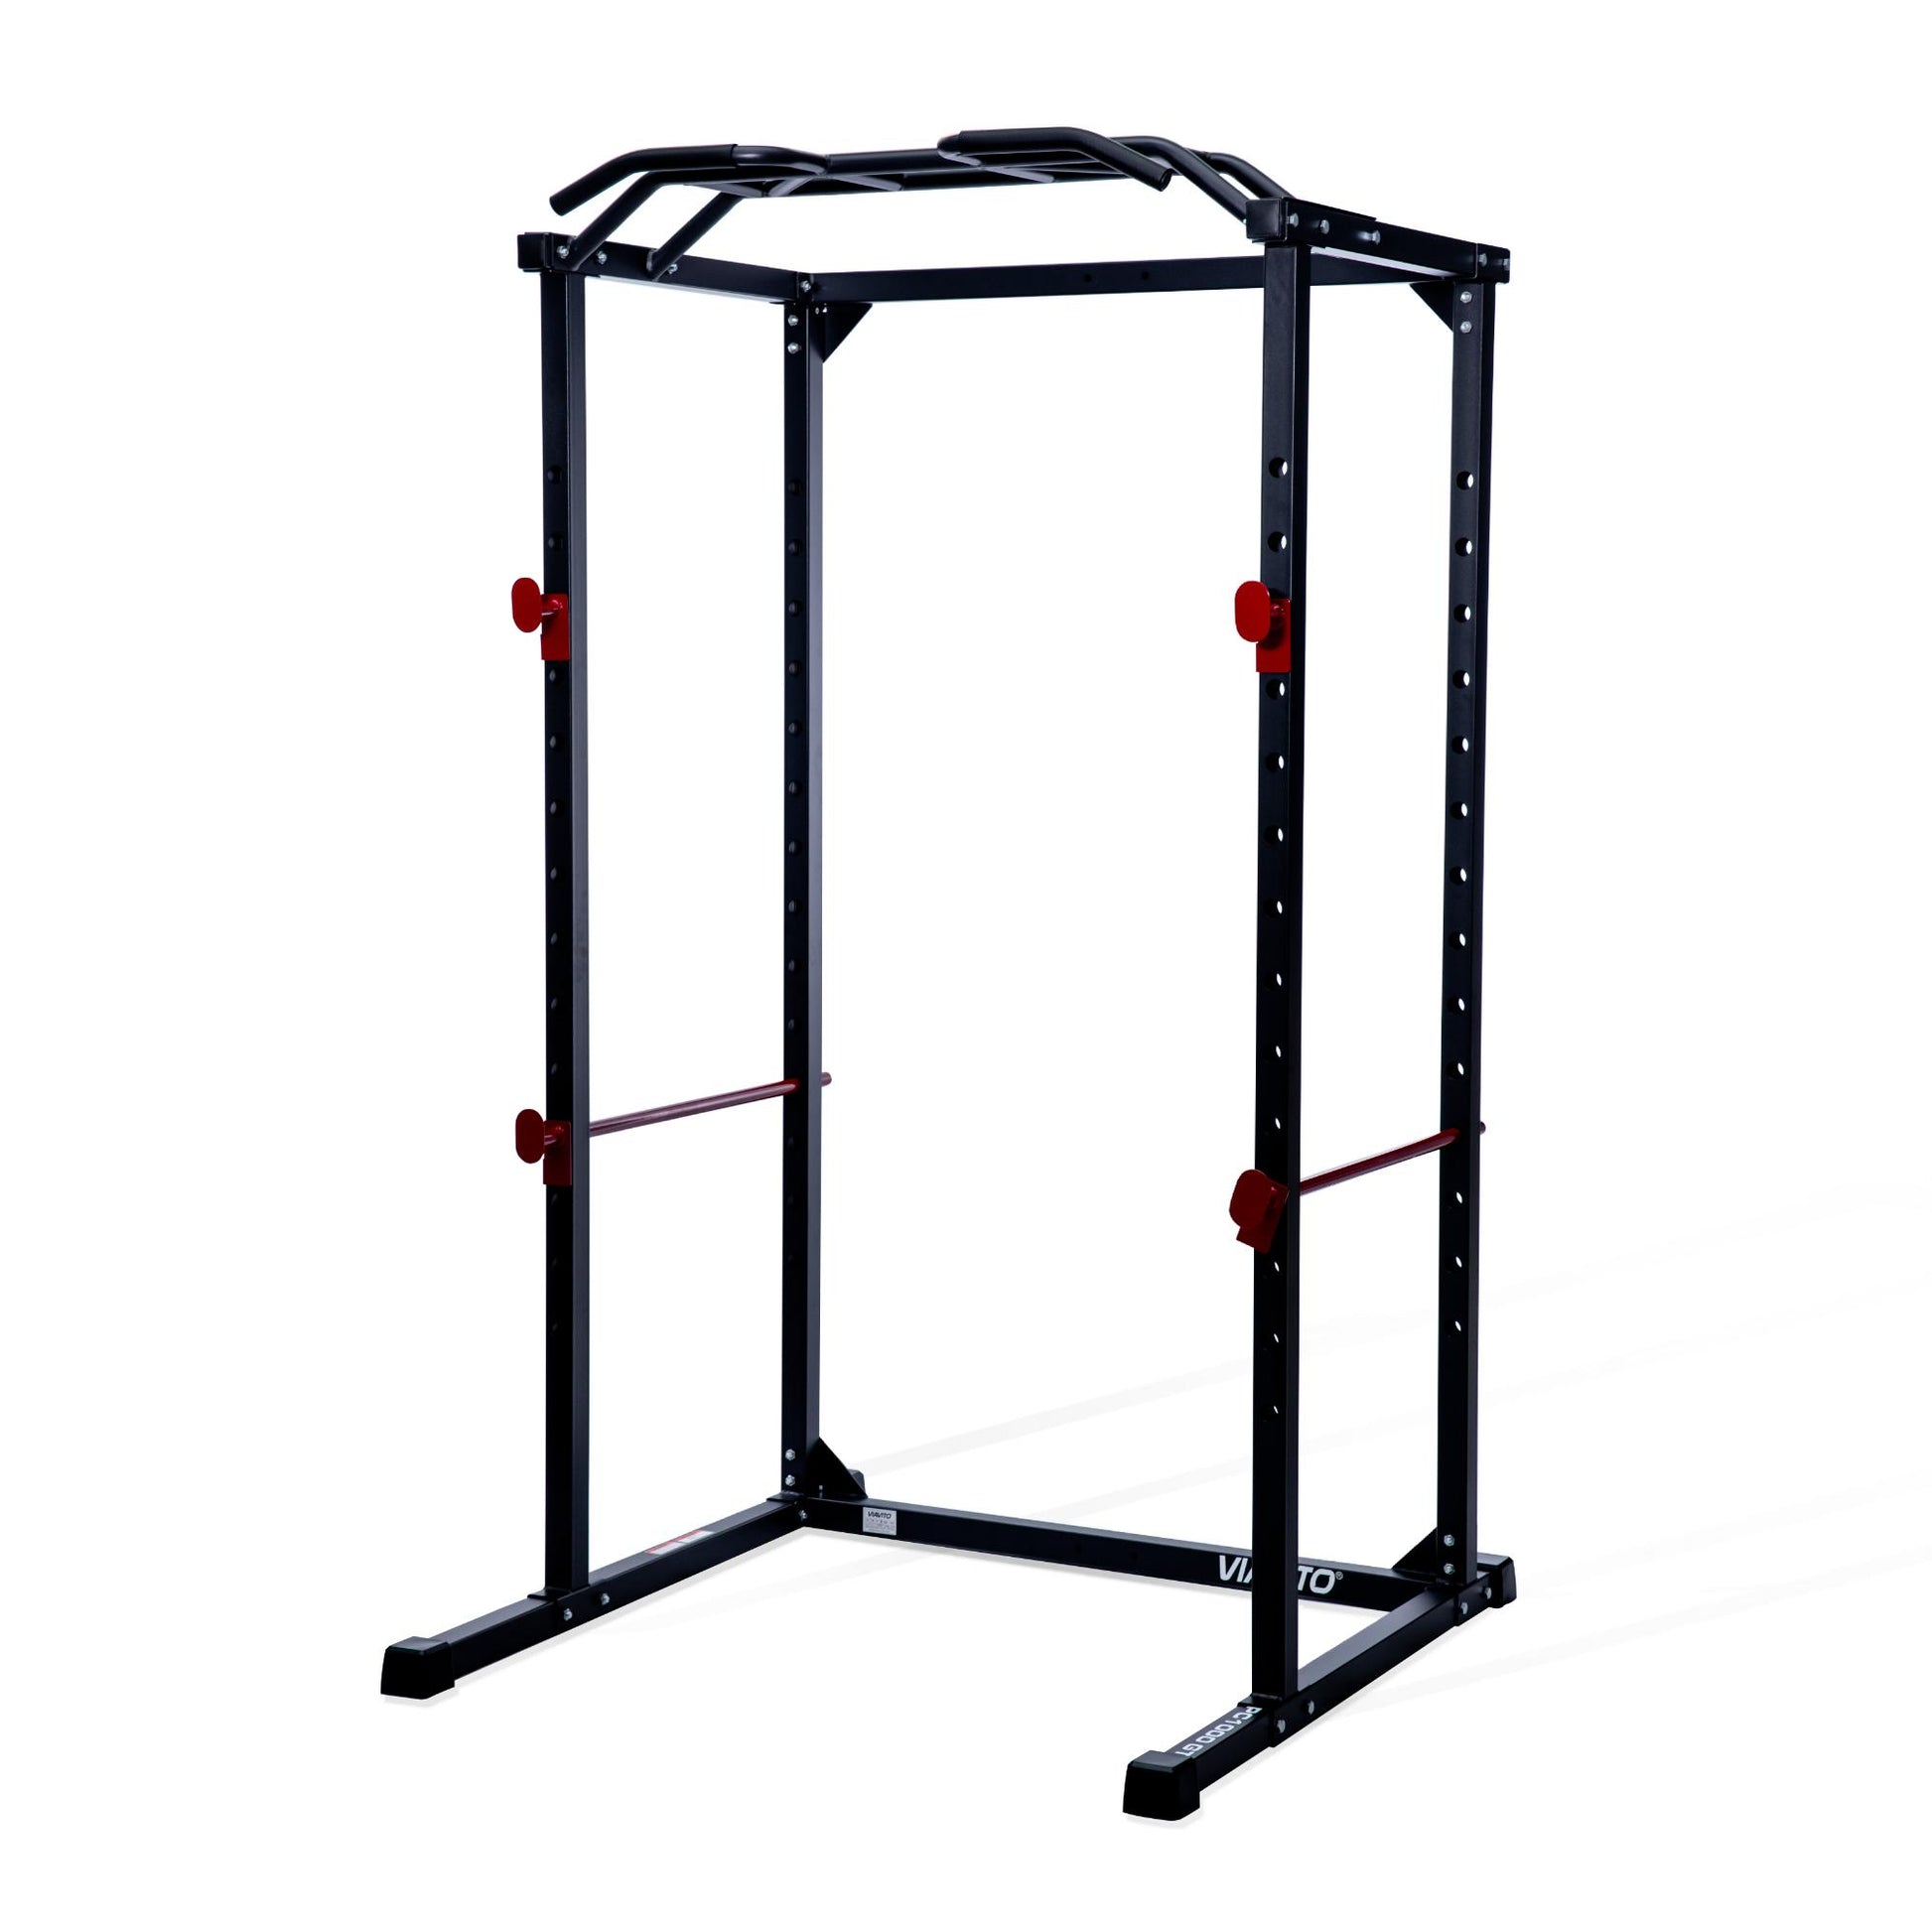 |Viavito PC1000 GT Power Cage - main image updated|